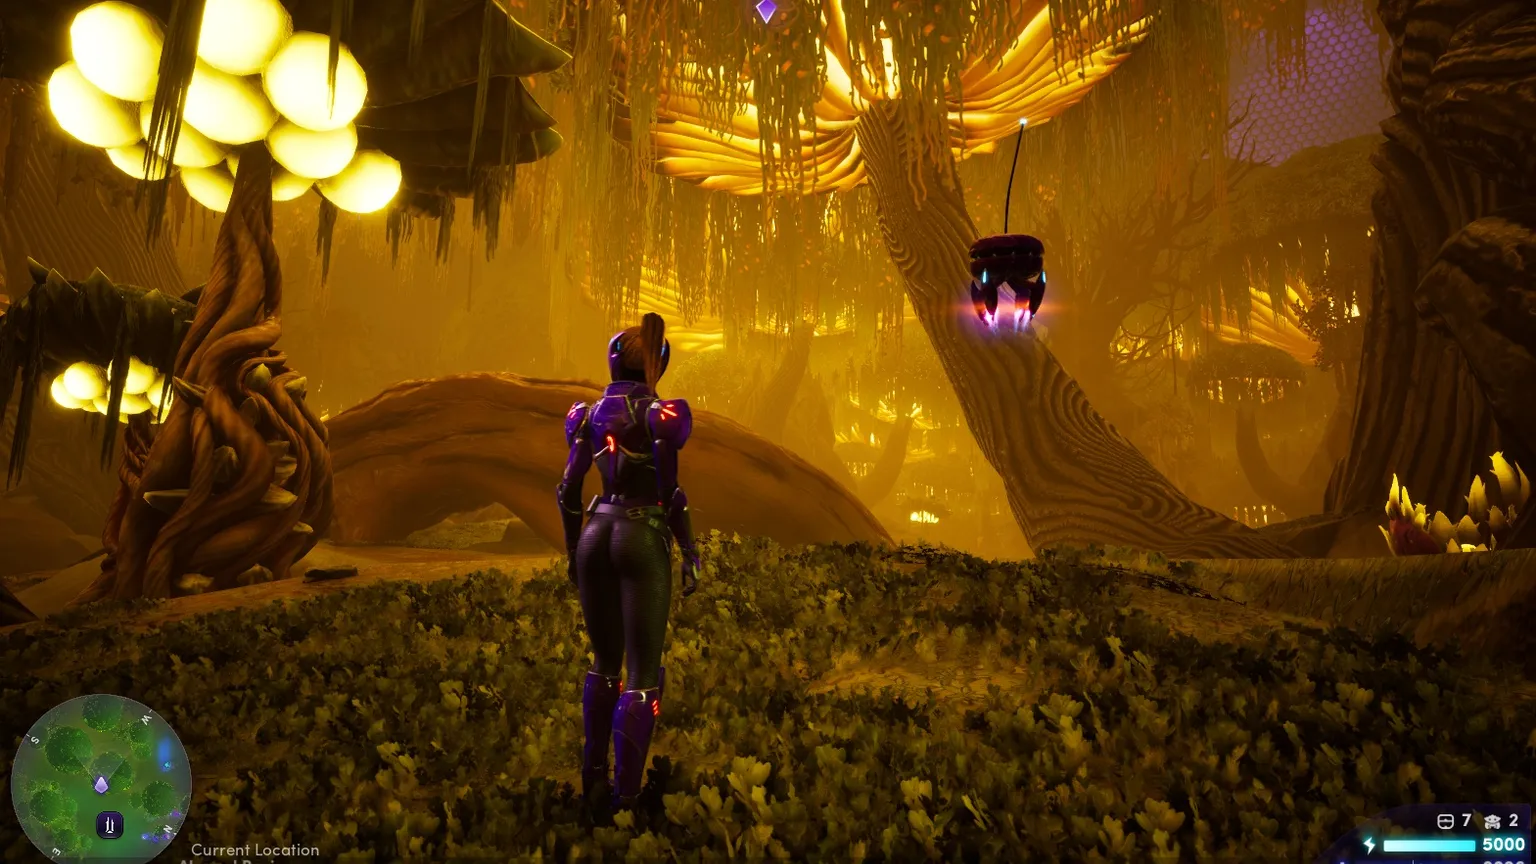 Screenshot of Illuvium Overworld showing character with floating drone in a grassy dark realm with golden light and tall mushrooms that are tree height.